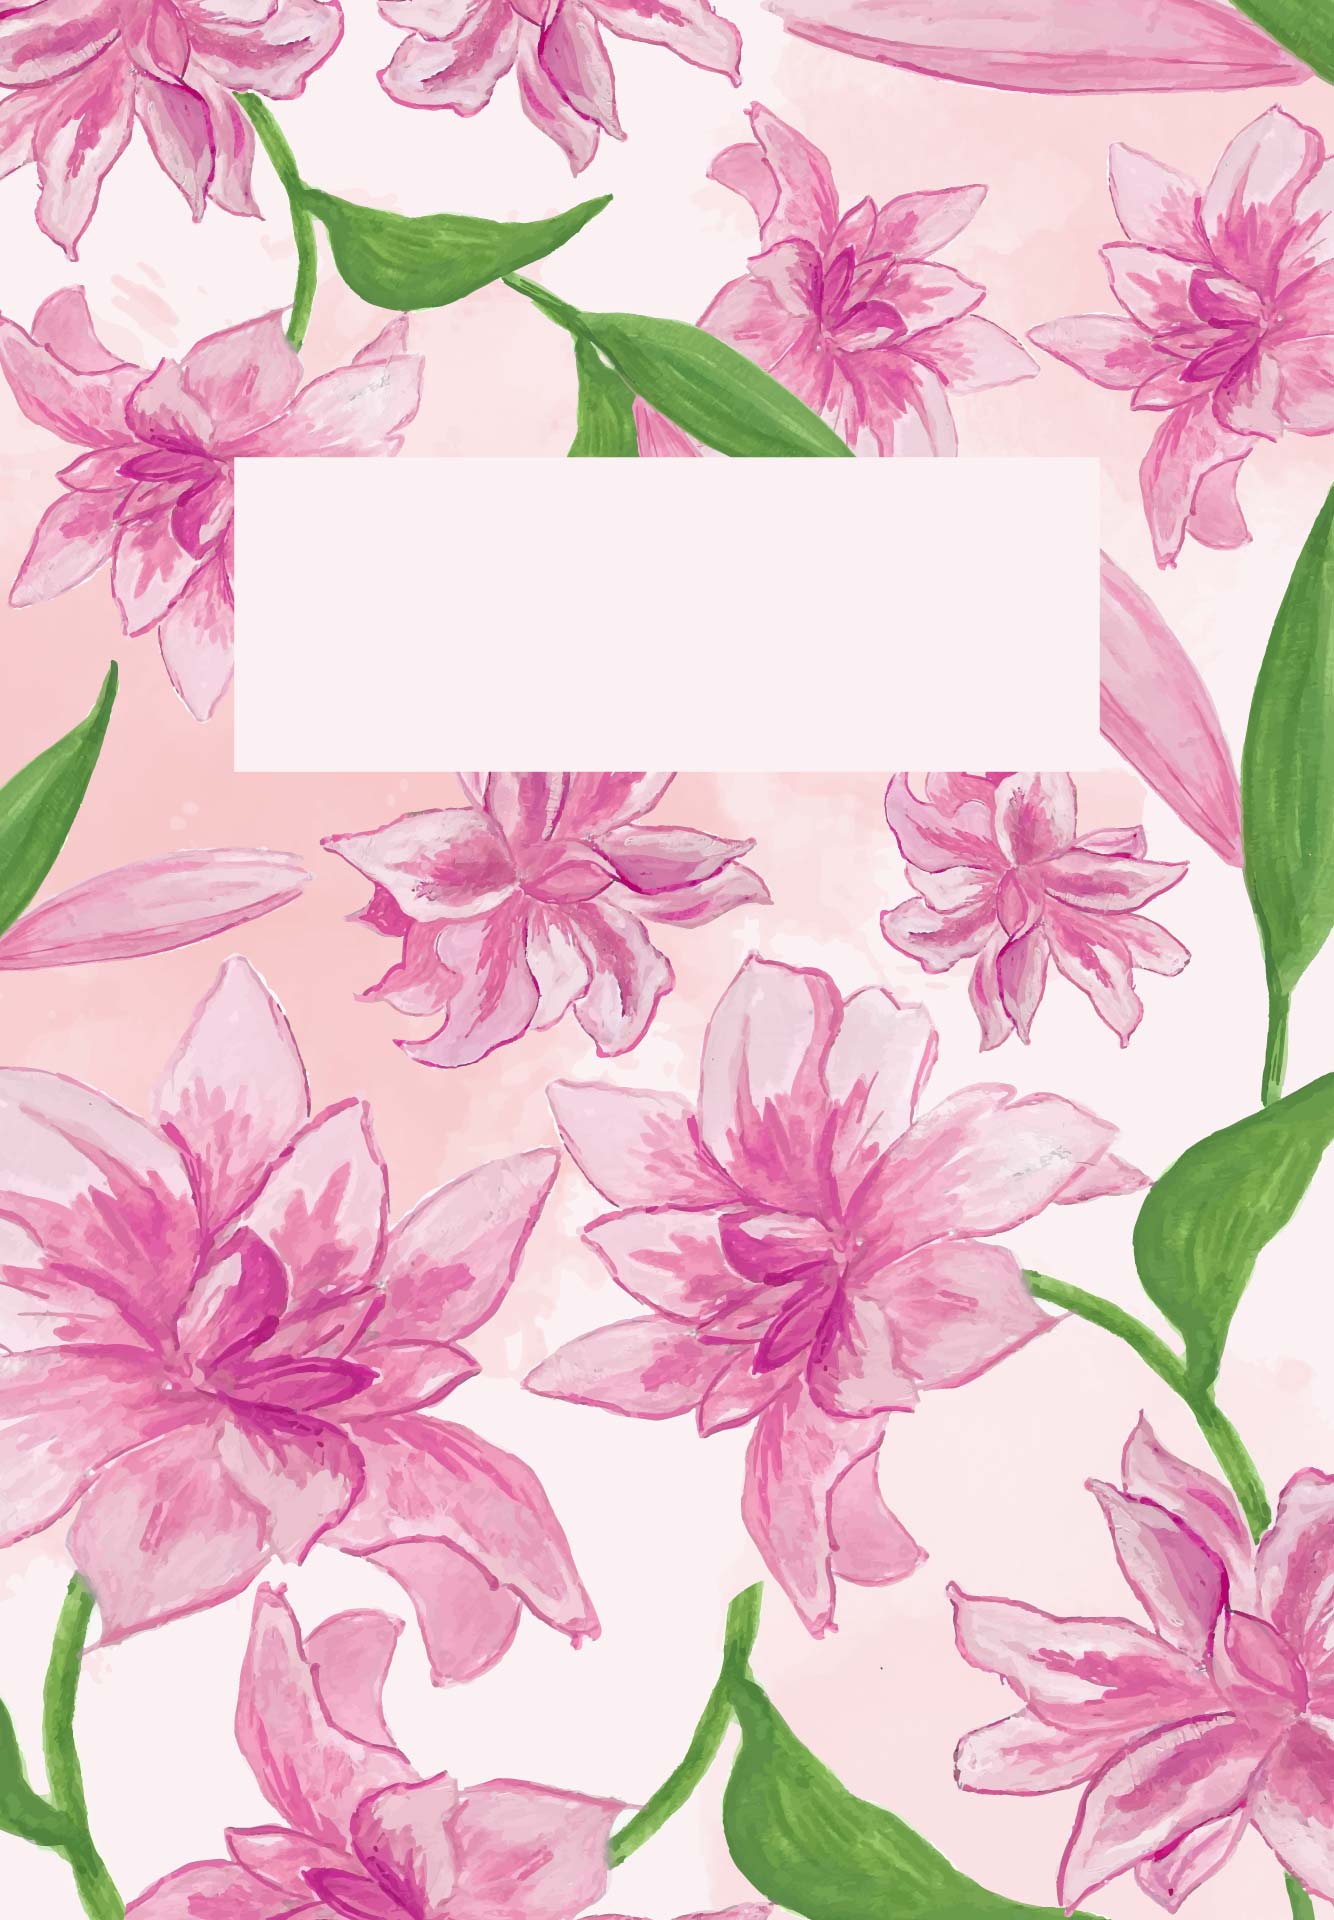 Lilly Pulitzer Binder Cover Templates